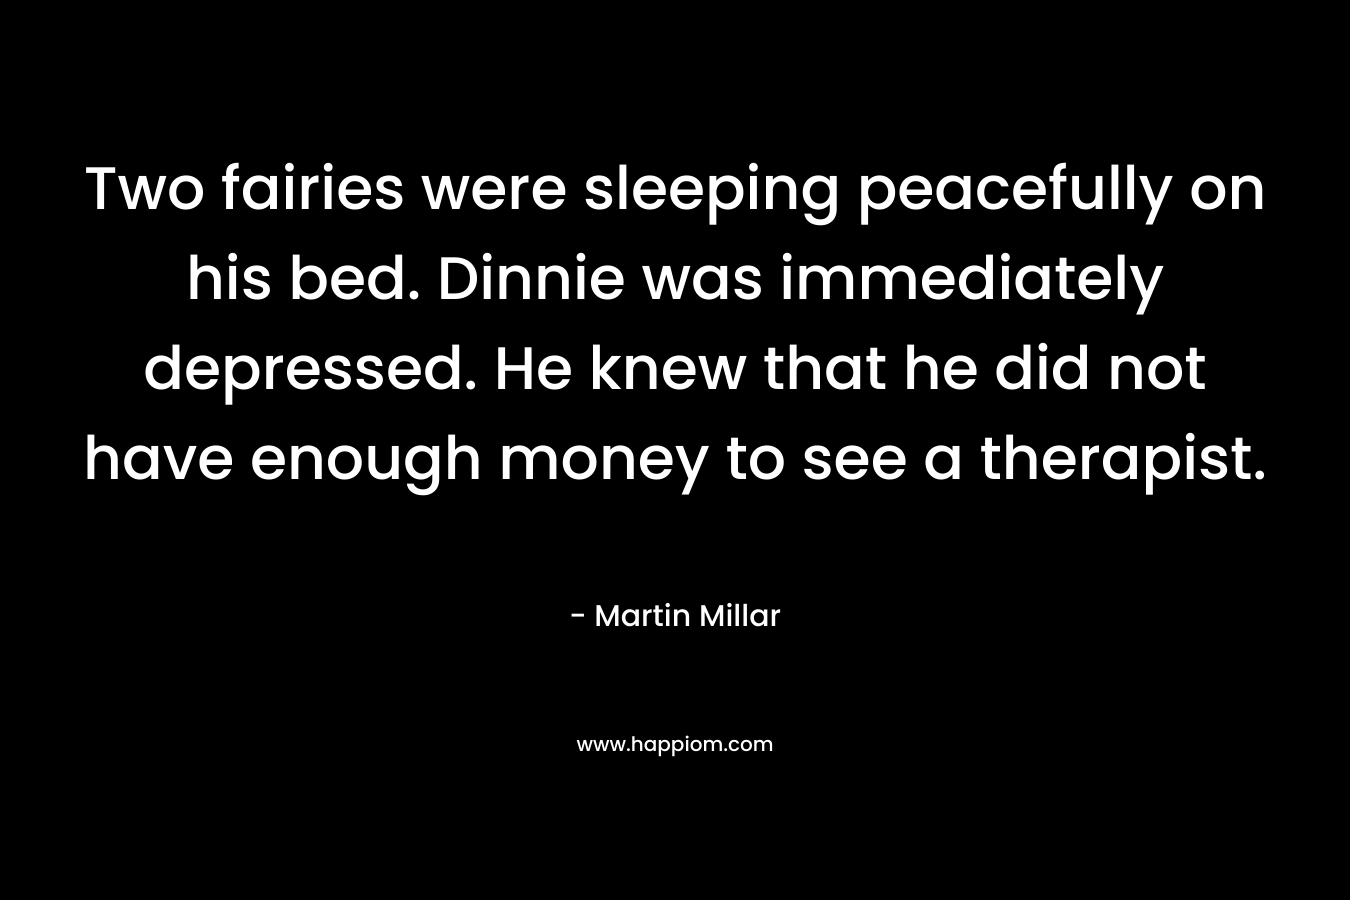 Two fairies were sleeping peacefully on his bed. Dinnie was immediately depressed. He knew that he did not have enough money to see a therapist. – Martin Millar